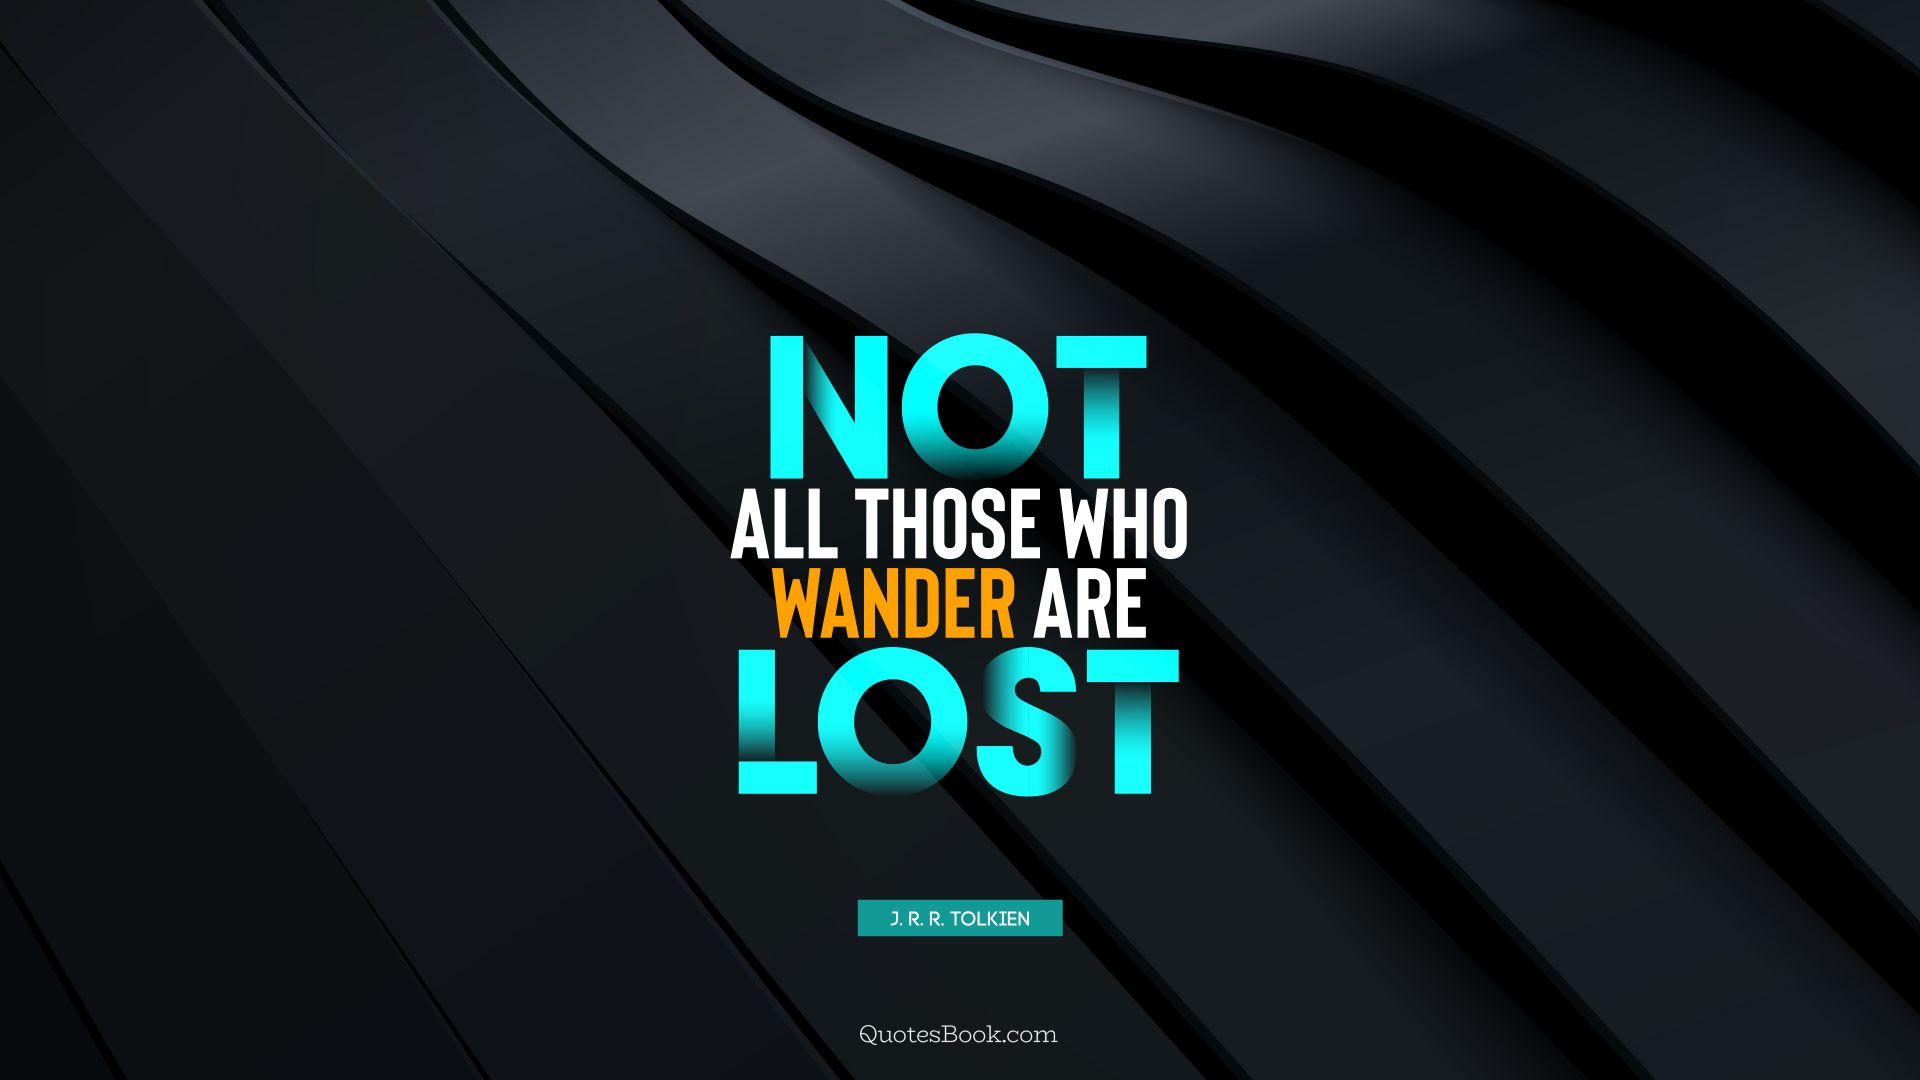 Not all those who wander are lost. - Quote by J. R. R. Tolkien